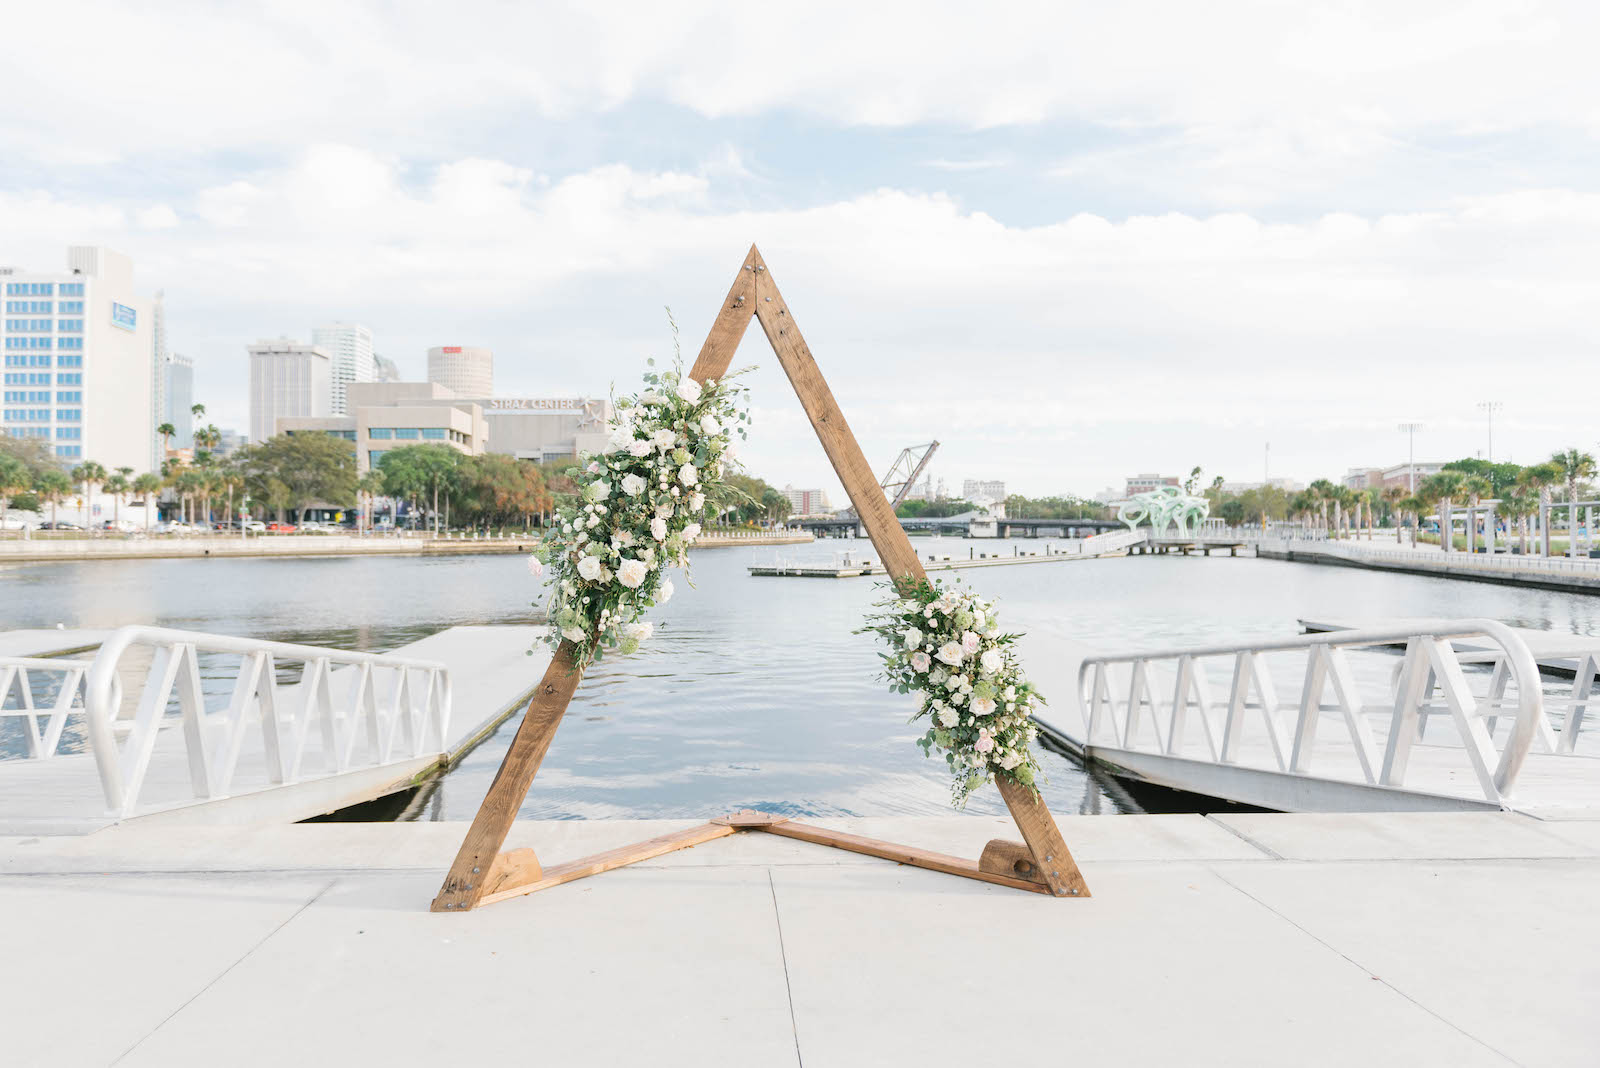 Boho Chic Waterfront Wedding Ceremony Decor, Triangular Wooden Arch with Lush Greenery and White, Ivory Roses | Wedding Venue The Tampa River Center | Wedding Venue Parties A'la Carte | Wedding Florist Bruce Wayne Florals